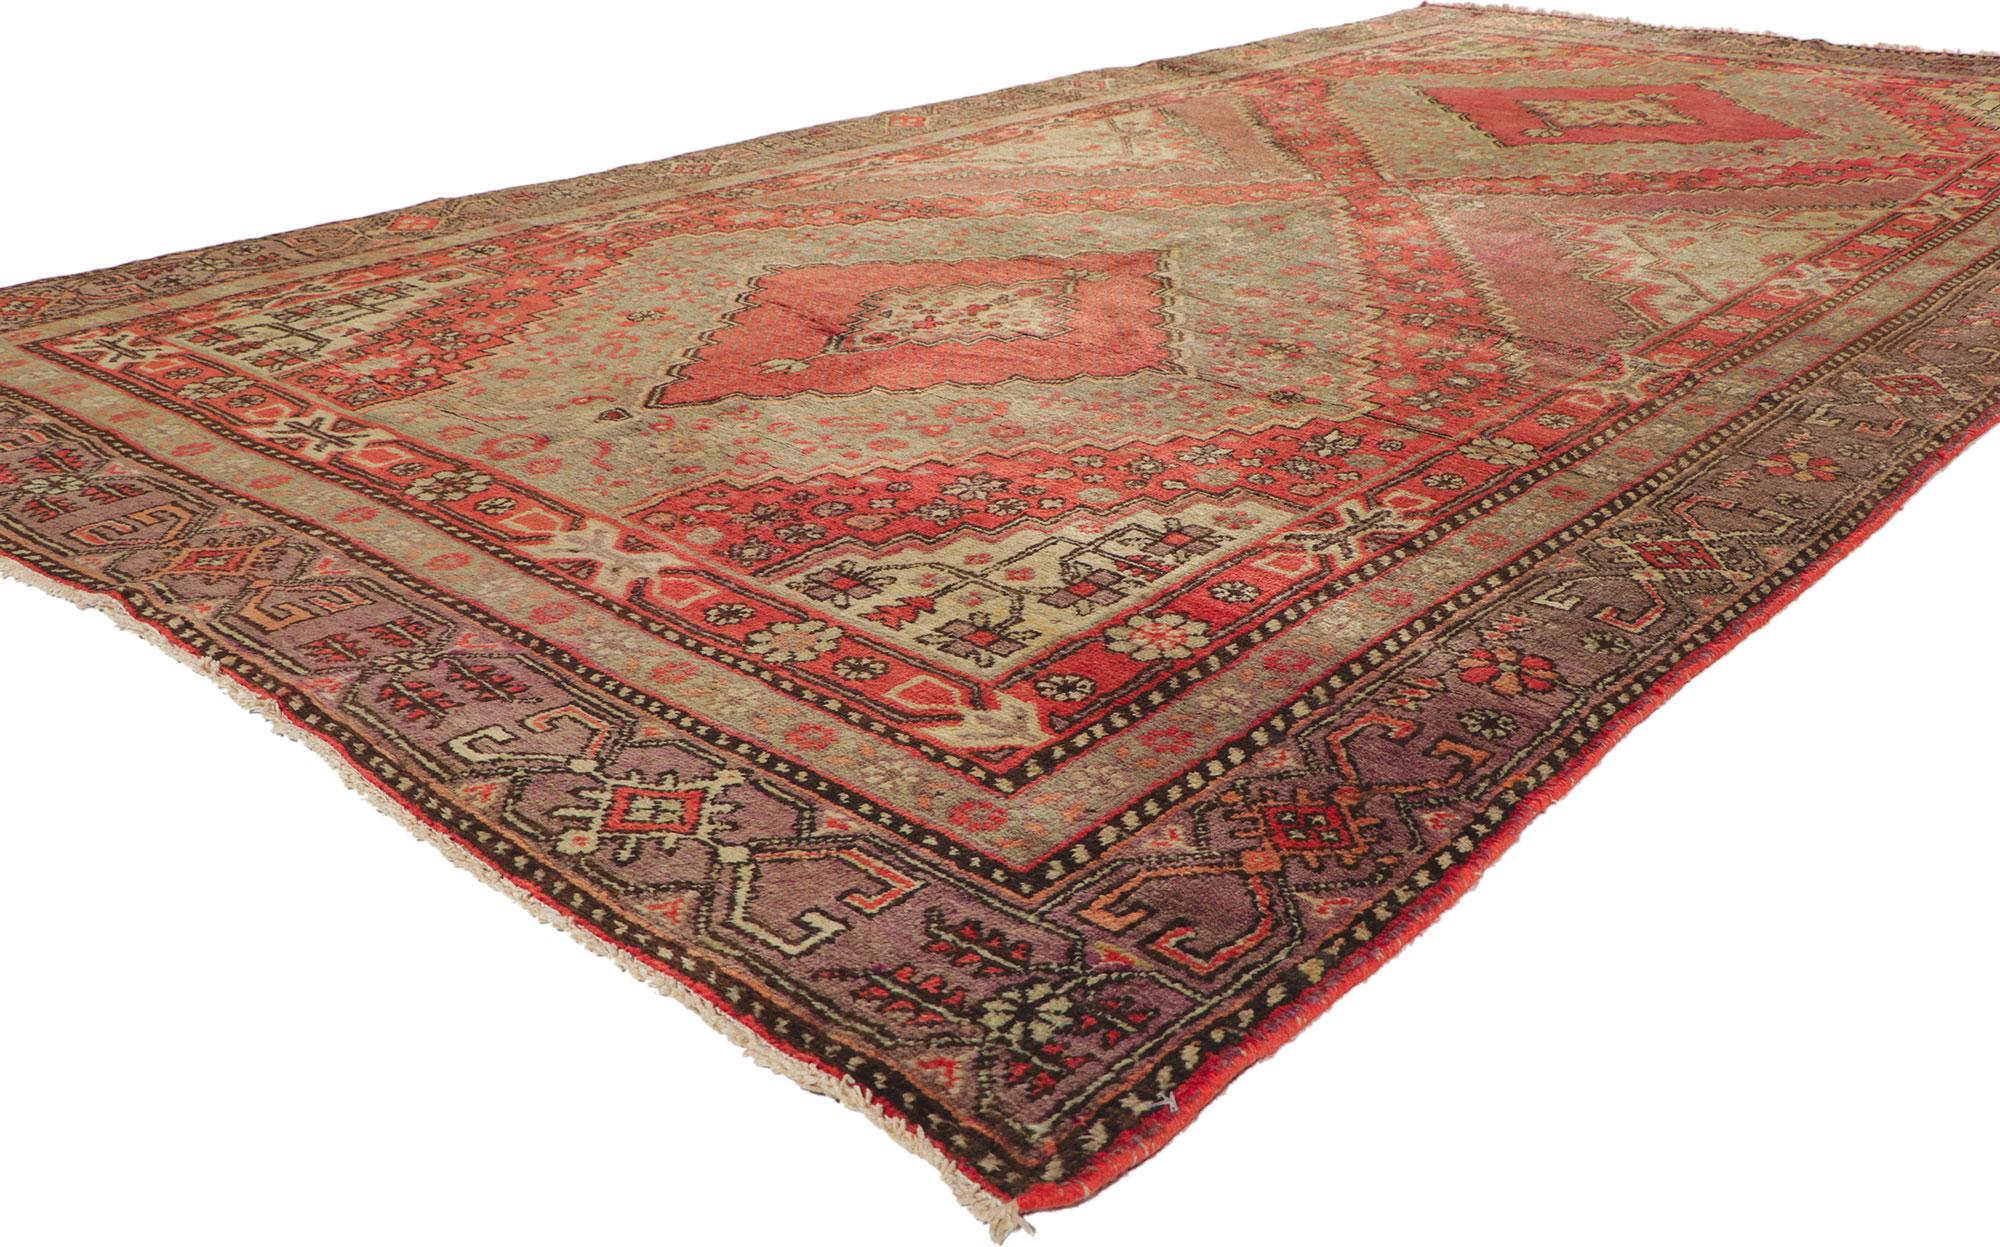 73810 Vintage Turkestan Khotan Rug, 06'02 x 12'01. Turkestan Khotan rugs, originating from the historic oasis town of Khotan in western China along the Silk Road, are renowned for their intricate designs inspired by Persian, Chinese, and Central